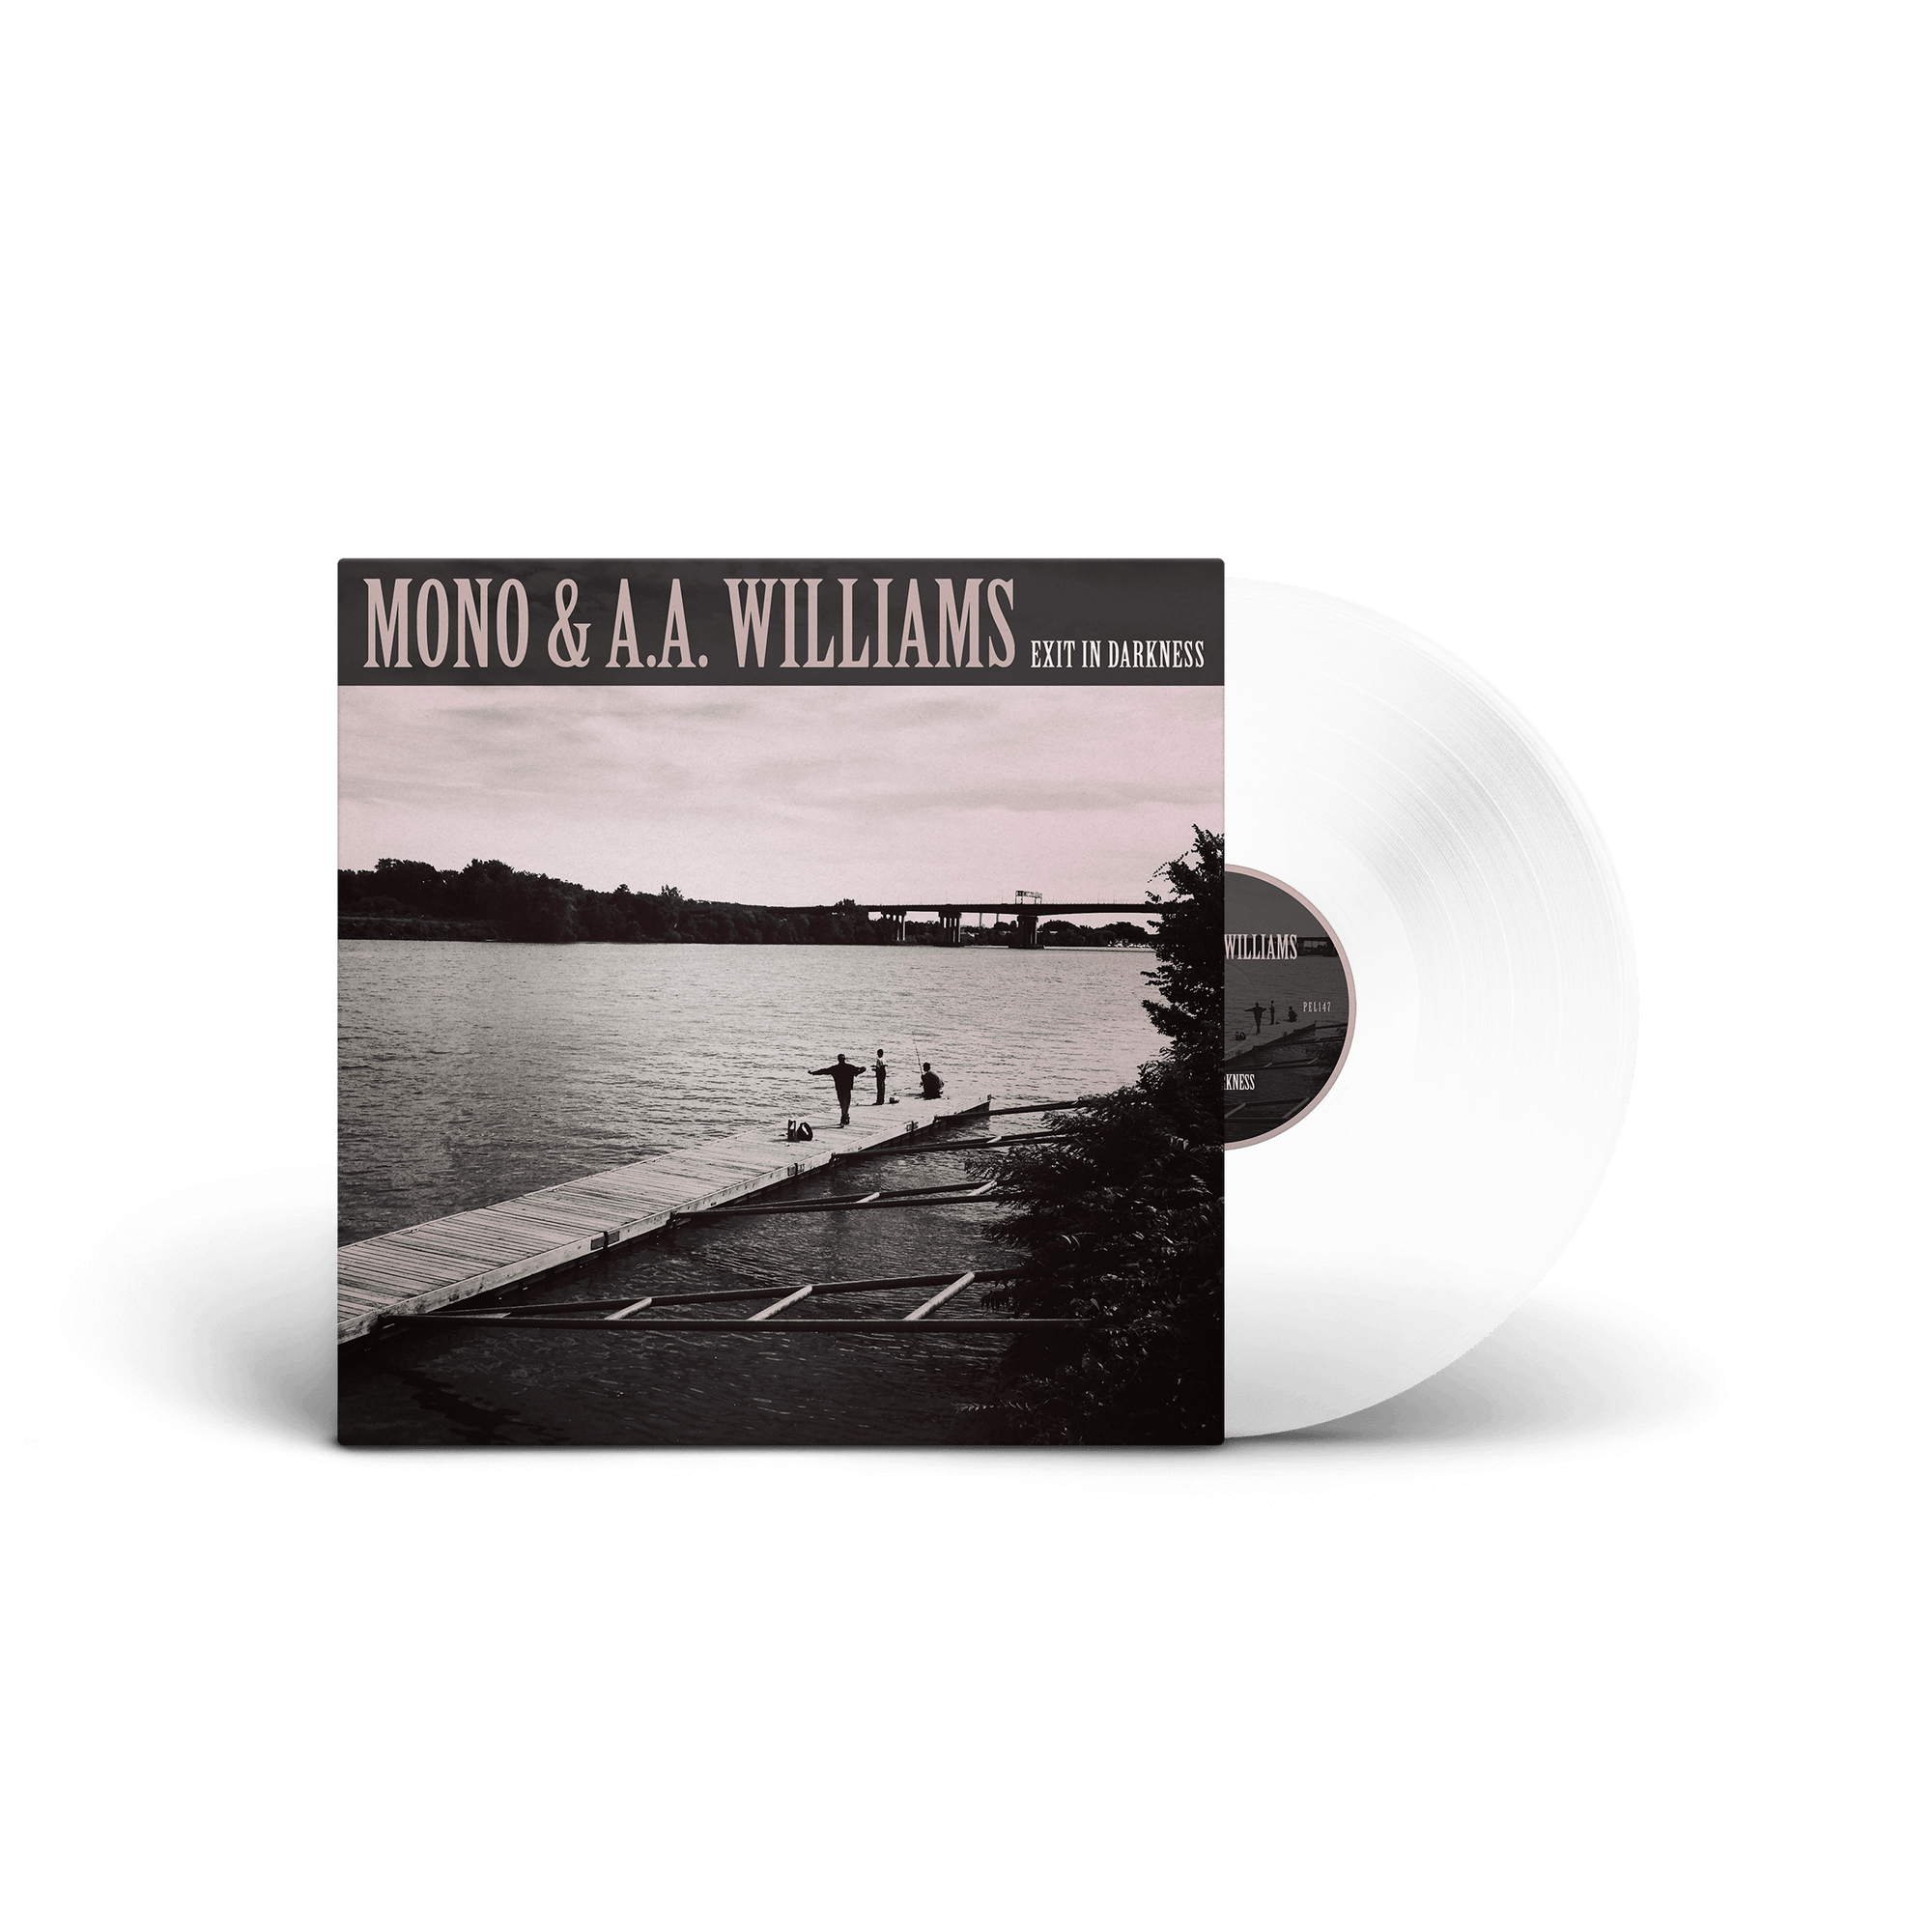 MONO & A.A. WILLIAMS // EXIT IN DARKNESS (Clear Vinyl) (10in)